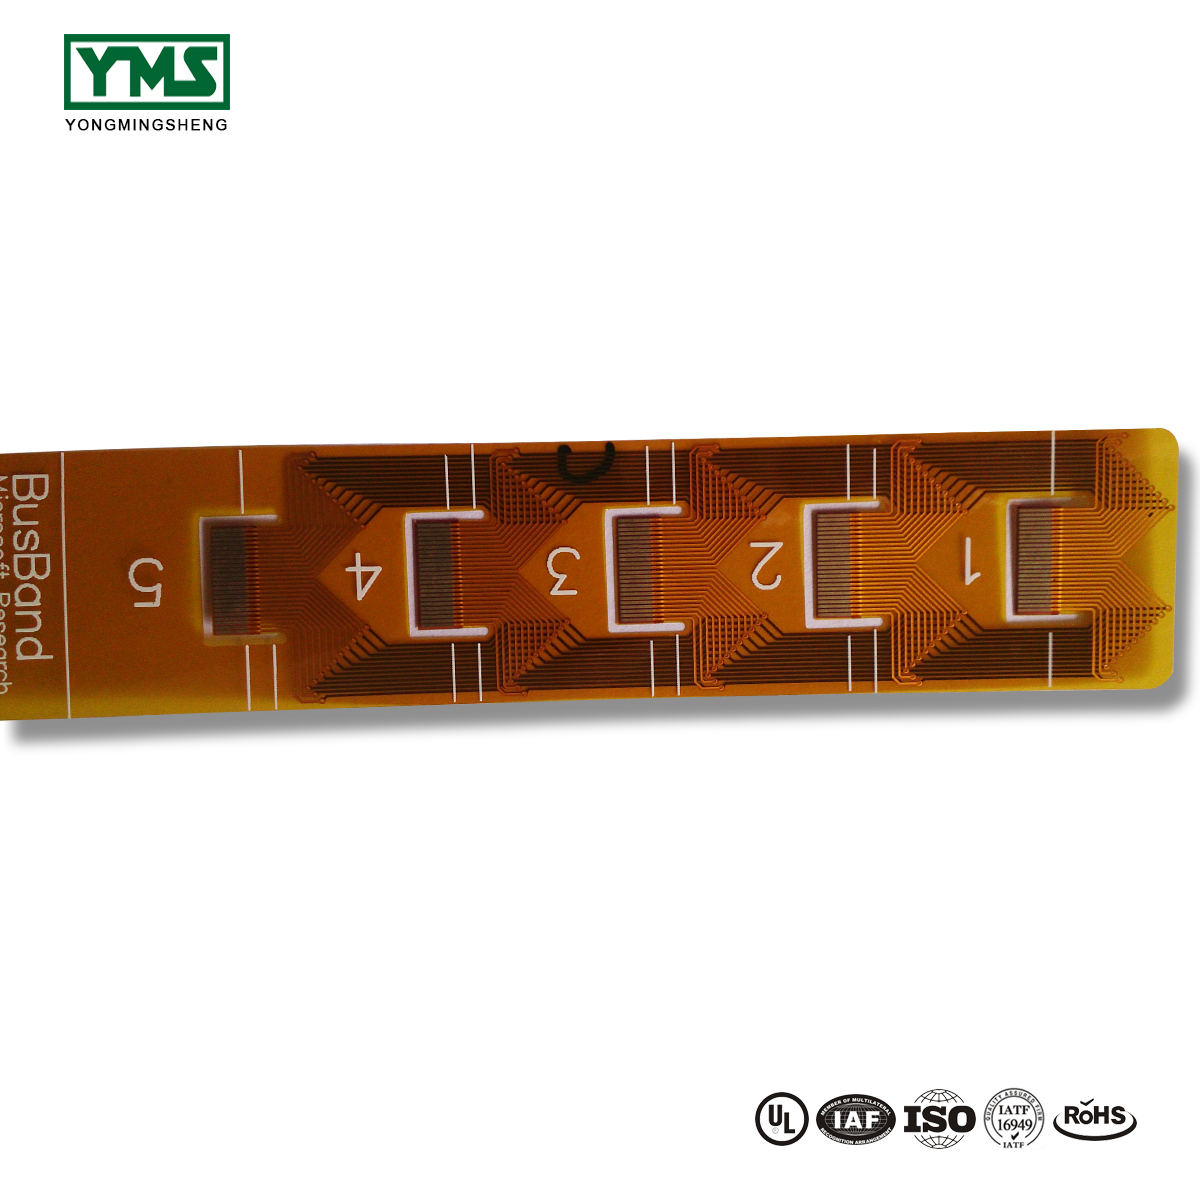 PriceList for 2layer Fpc - 0.10mm Ultrathin  2Layer FPC | YMS PCB – Yongmingsheng